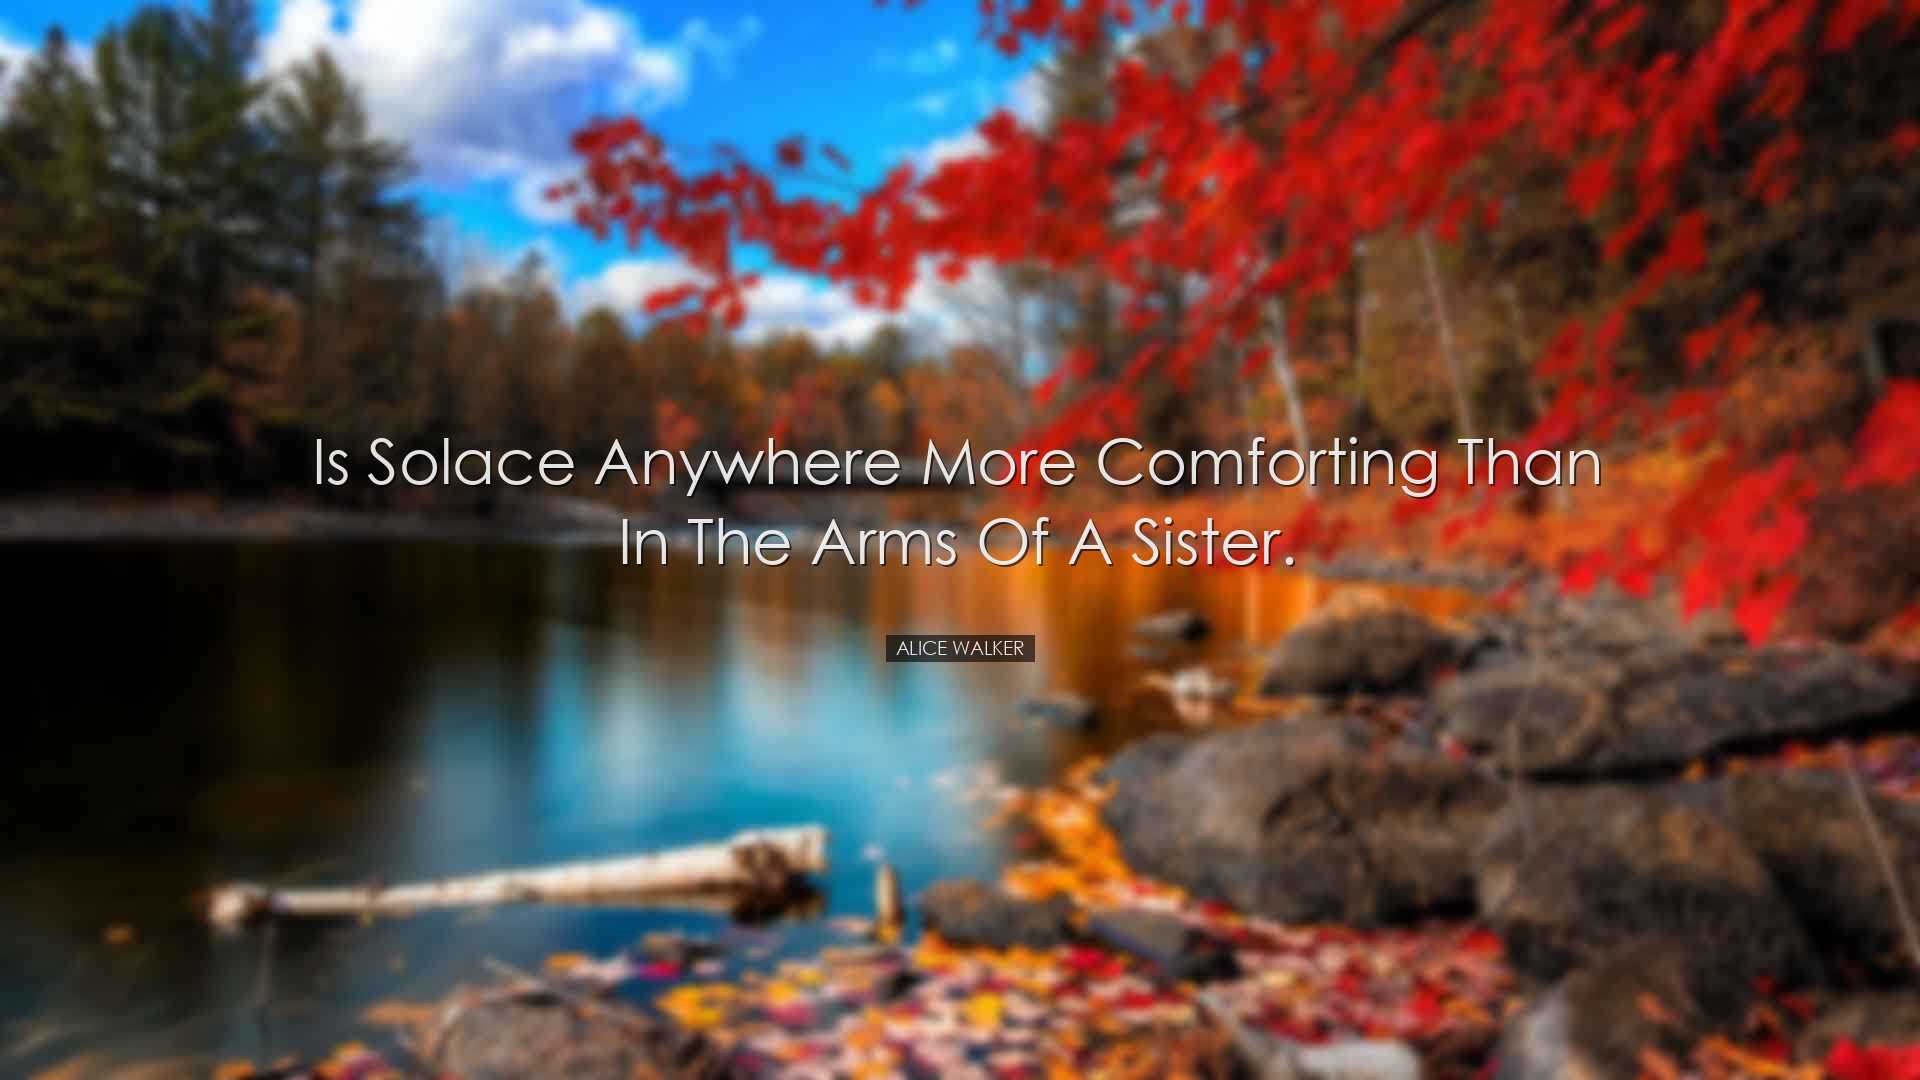 Is solace anywhere more comforting than in the arms of a sister. -